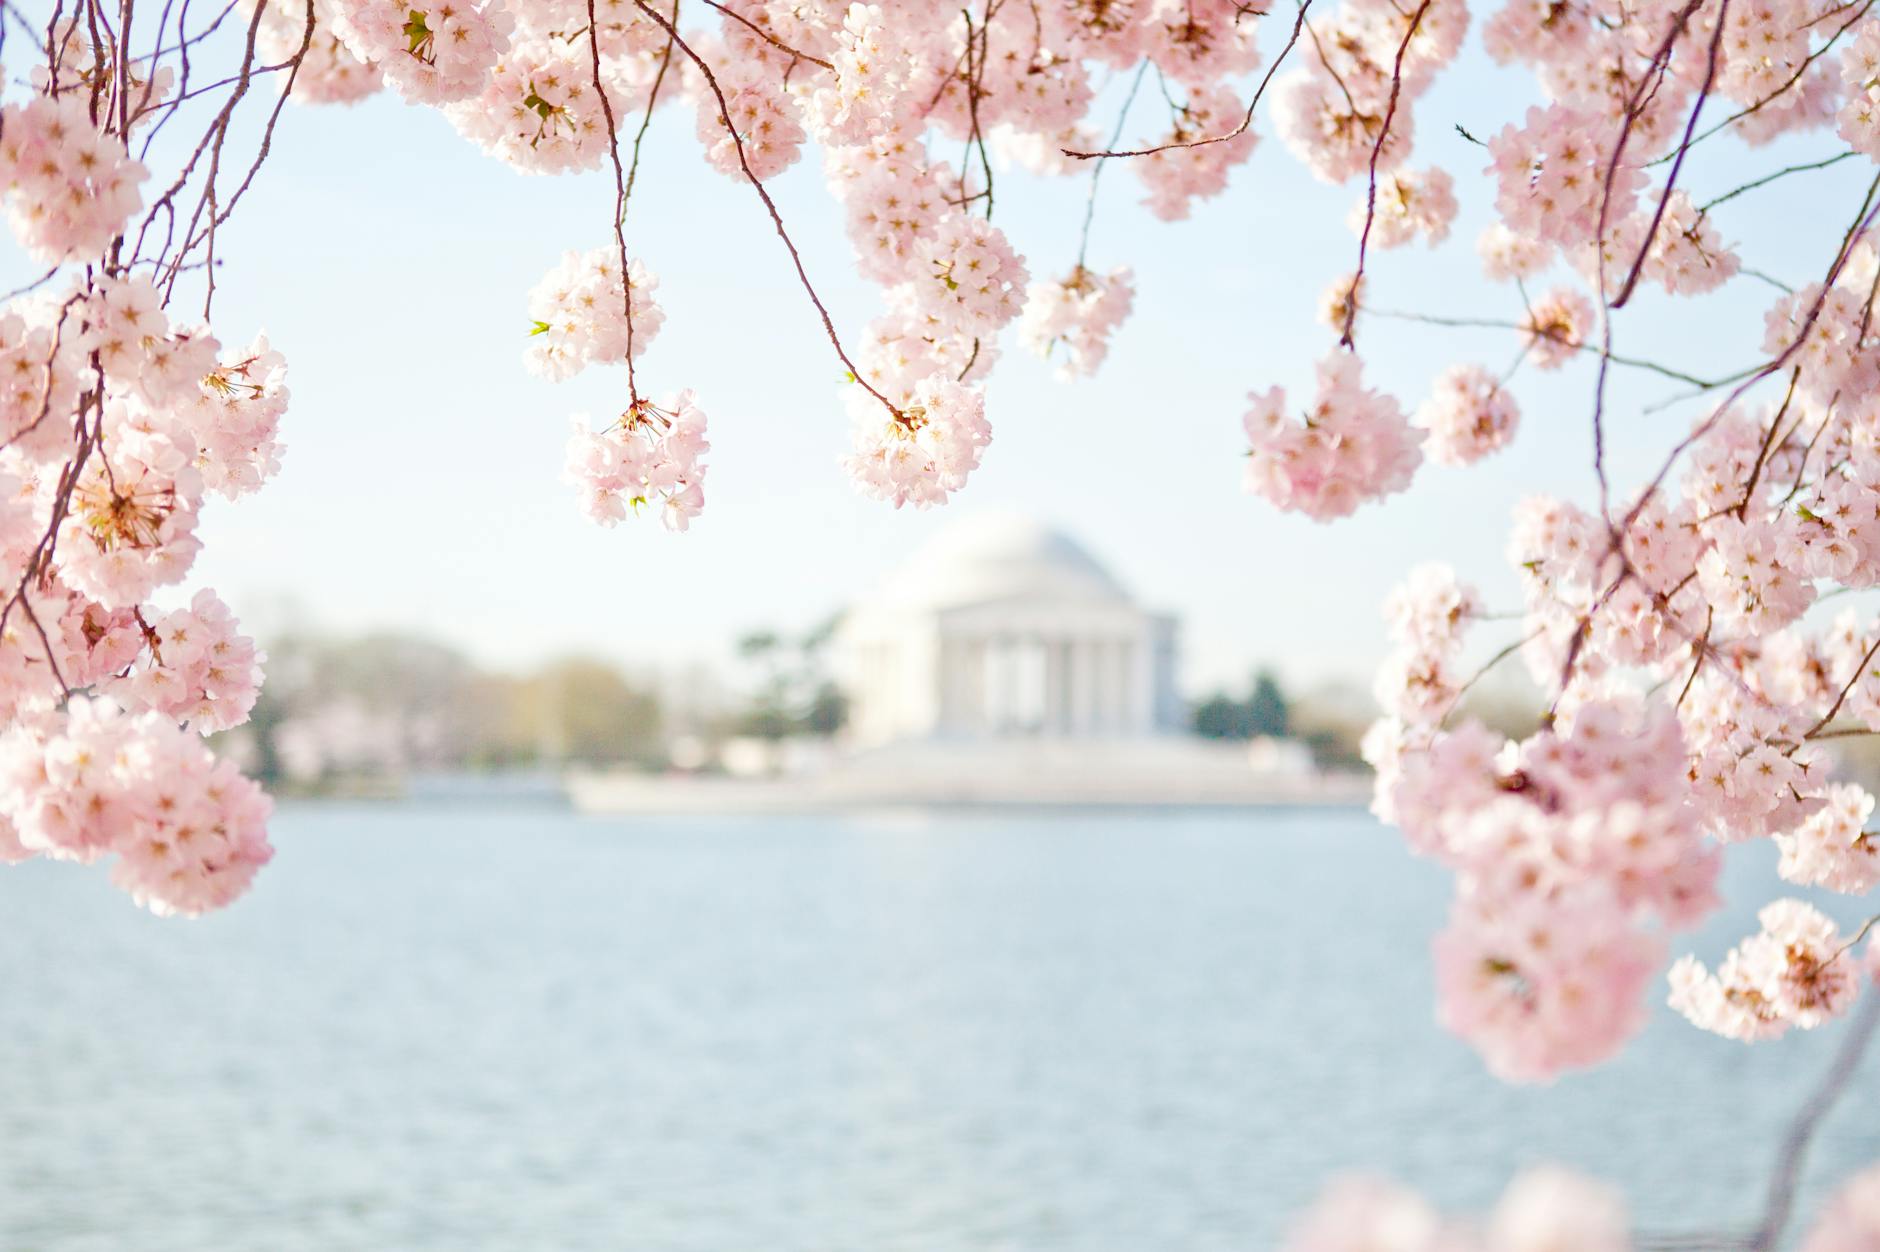 cherry blossoms in bloom with a view of the thomas jefferson memorial